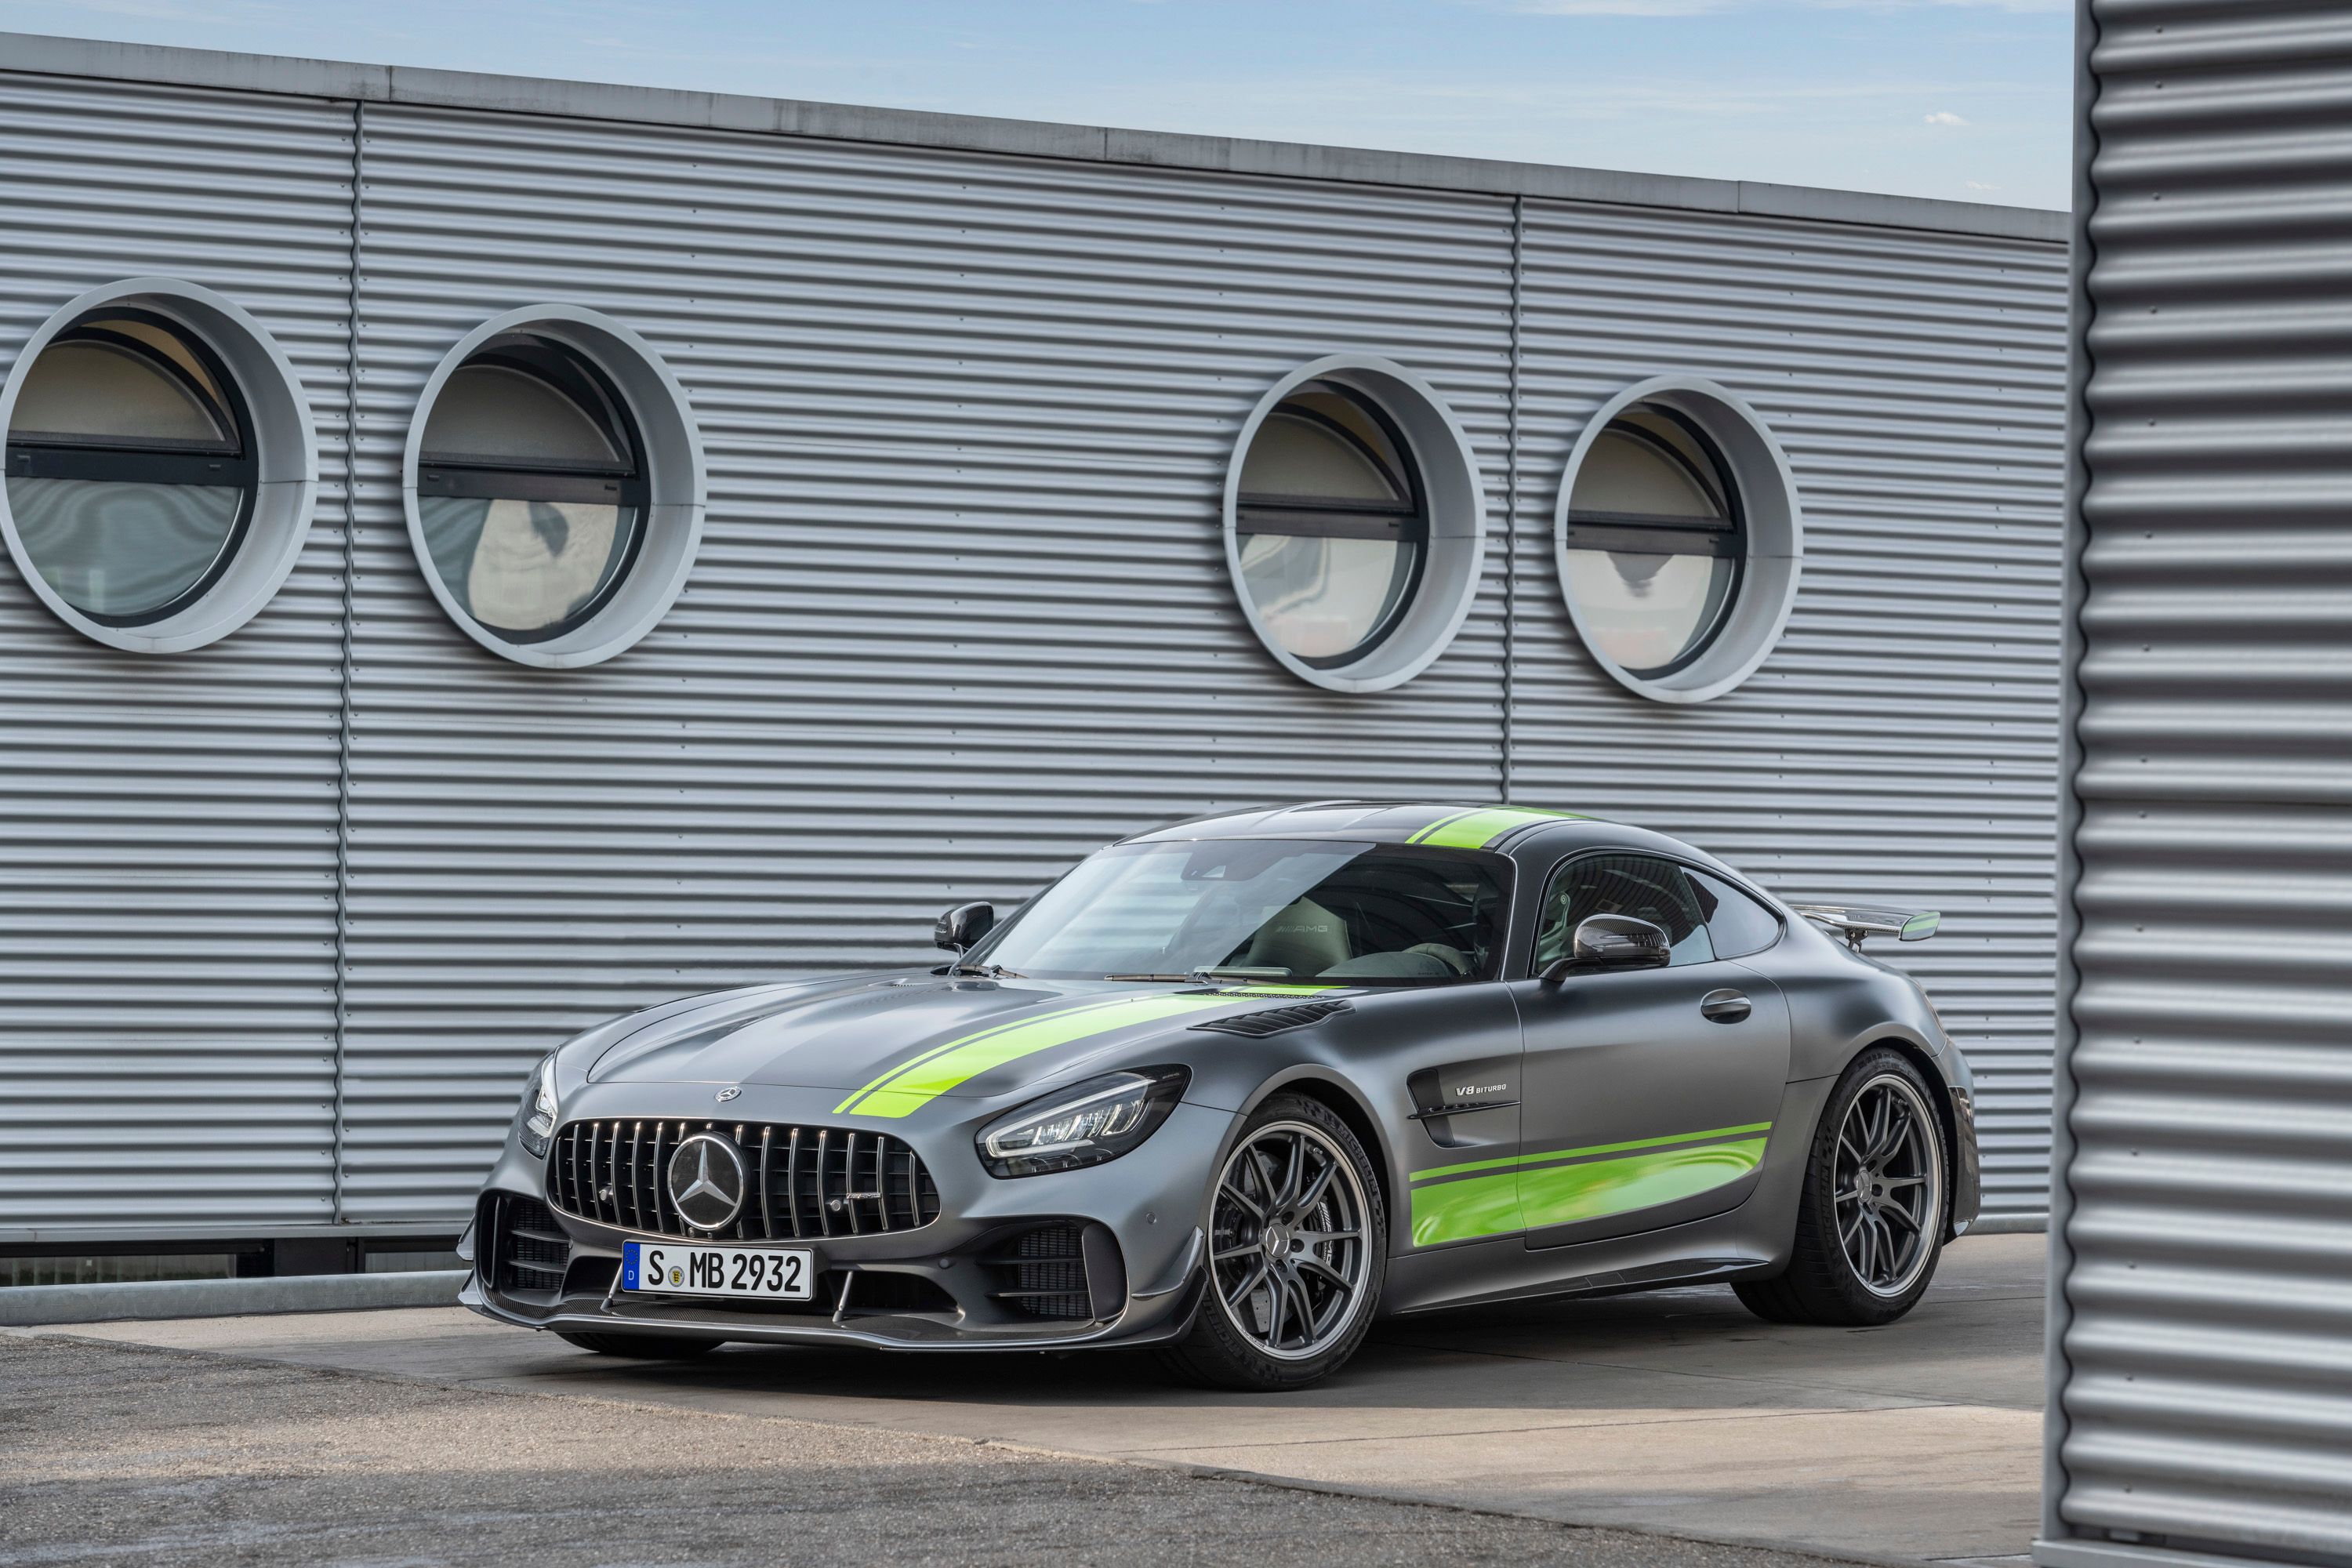 2020 Wallpaper of the Day: 2020 Mercedes-AMG GT R Pro